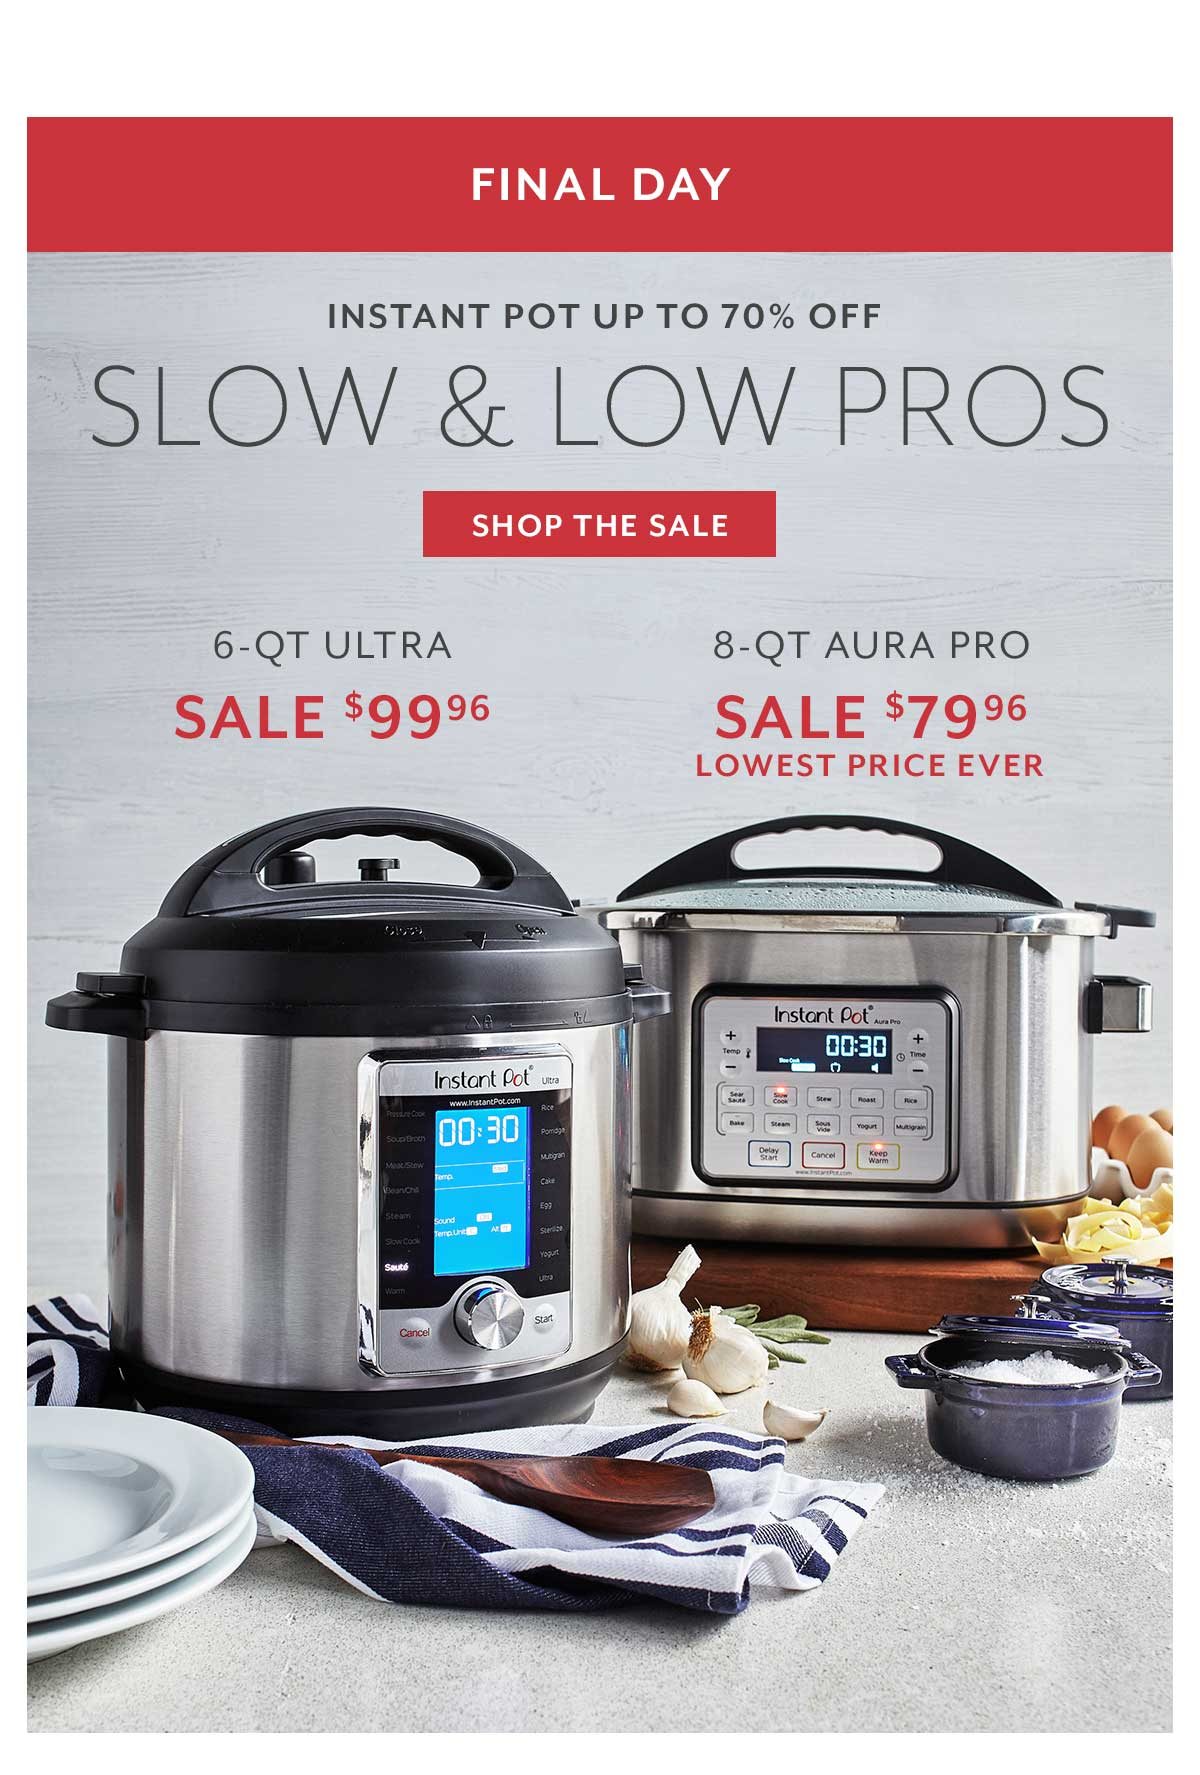 Instant Pot Up to 70% Off